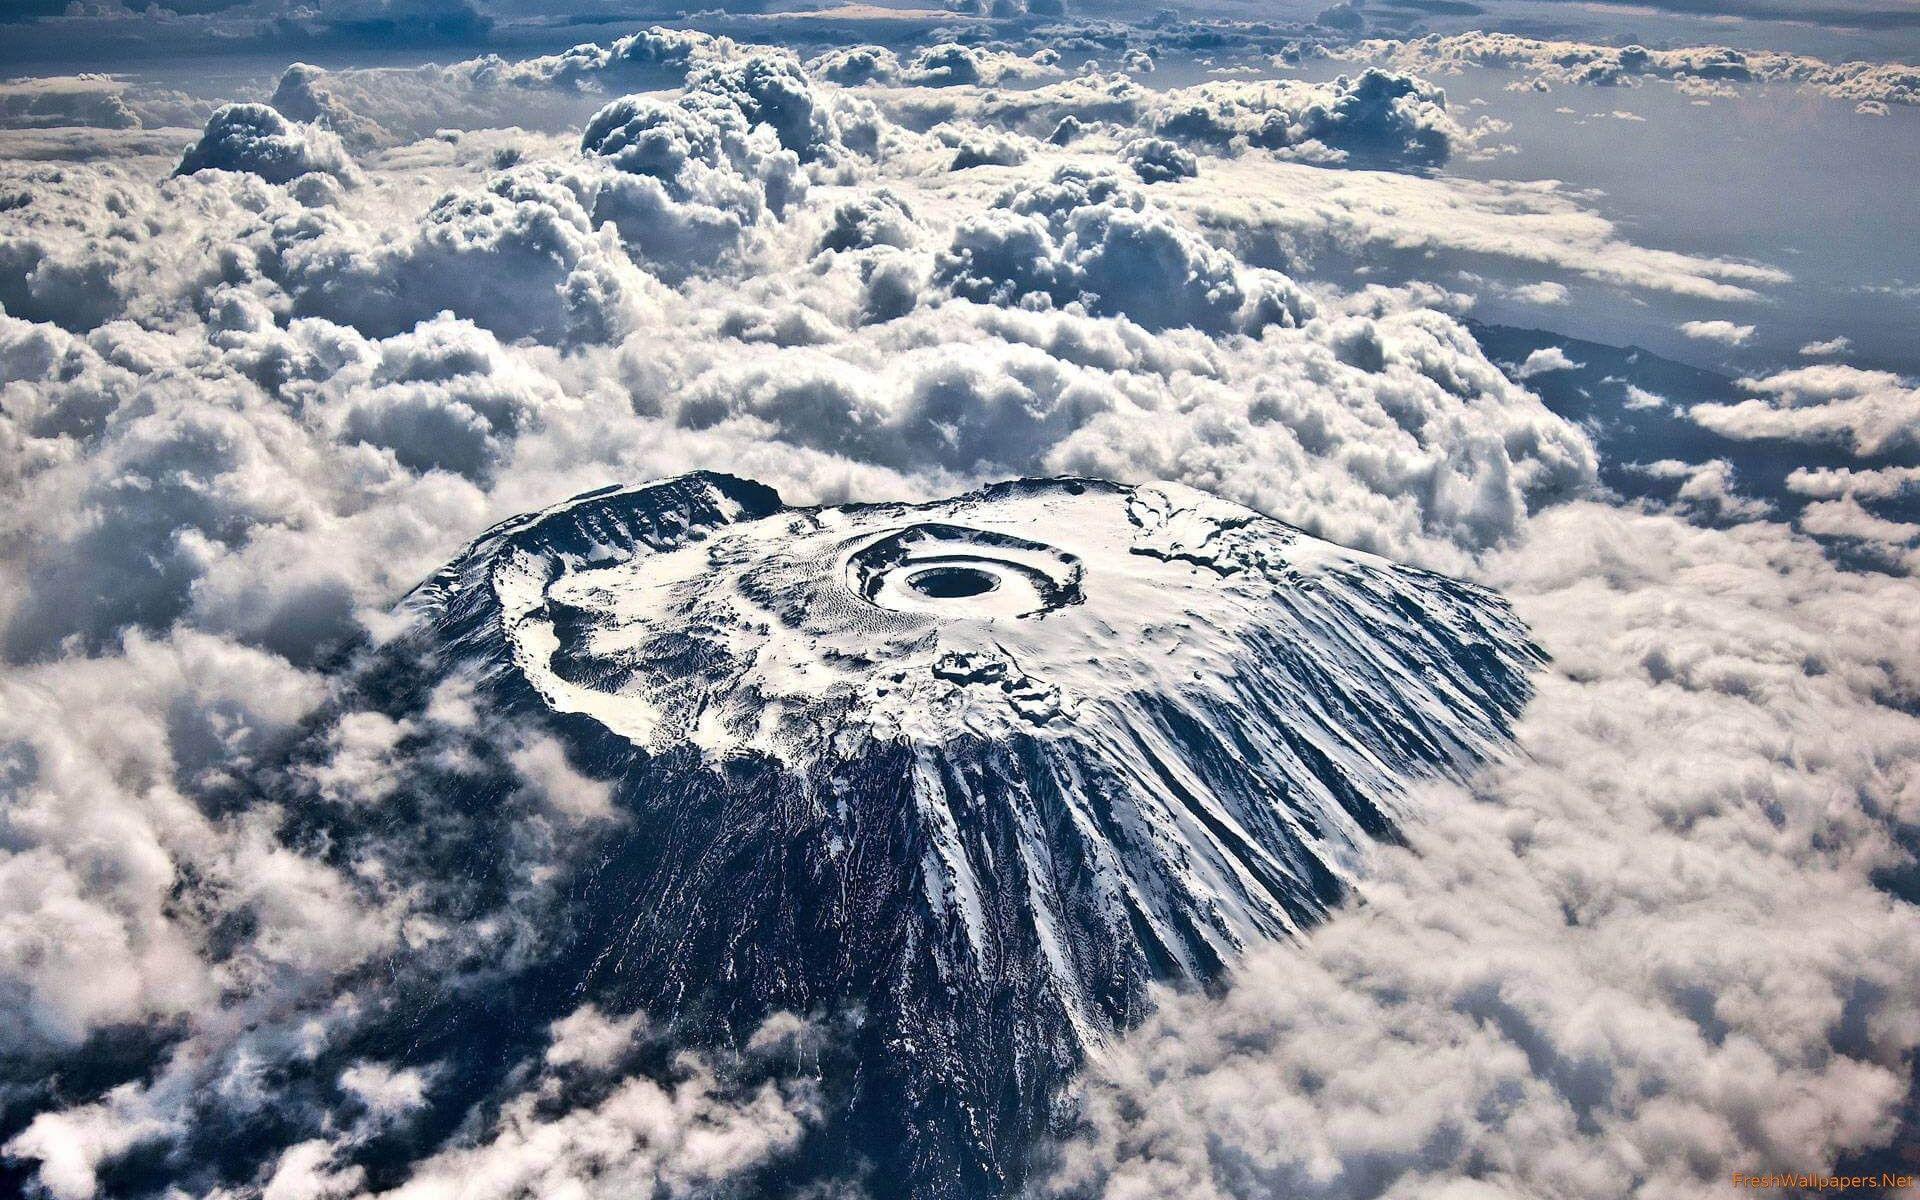 Mount Kilimanjaro Crater Over Clouds From The Air wallpaper